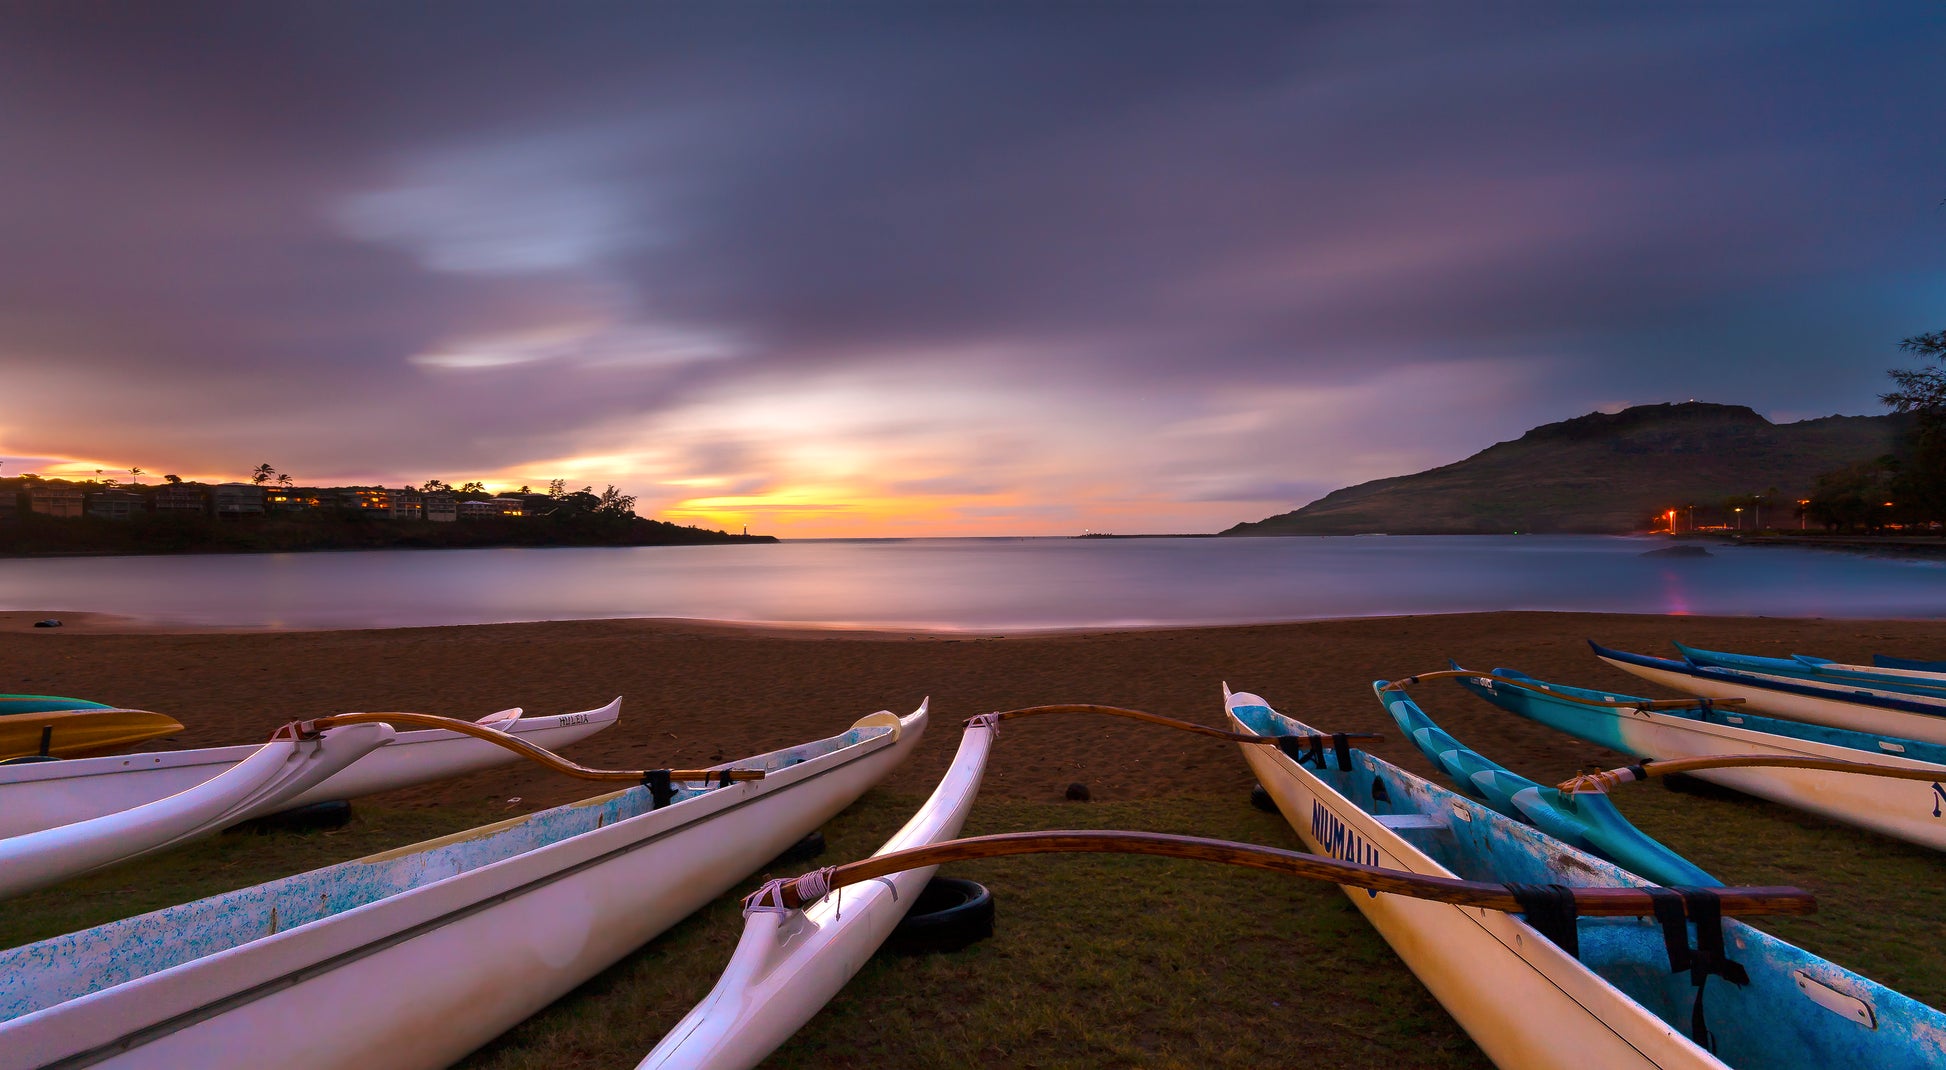 Fine art photograph of outrigger canoes lined up on Kalapaki Beach on Kauai. The photo was taken at sunrise, with a soft purplish blue sky, calm ocean, and canoes with a dim glow from surrounding lights. Landscape photograph by Inspiring Images Hawaii.